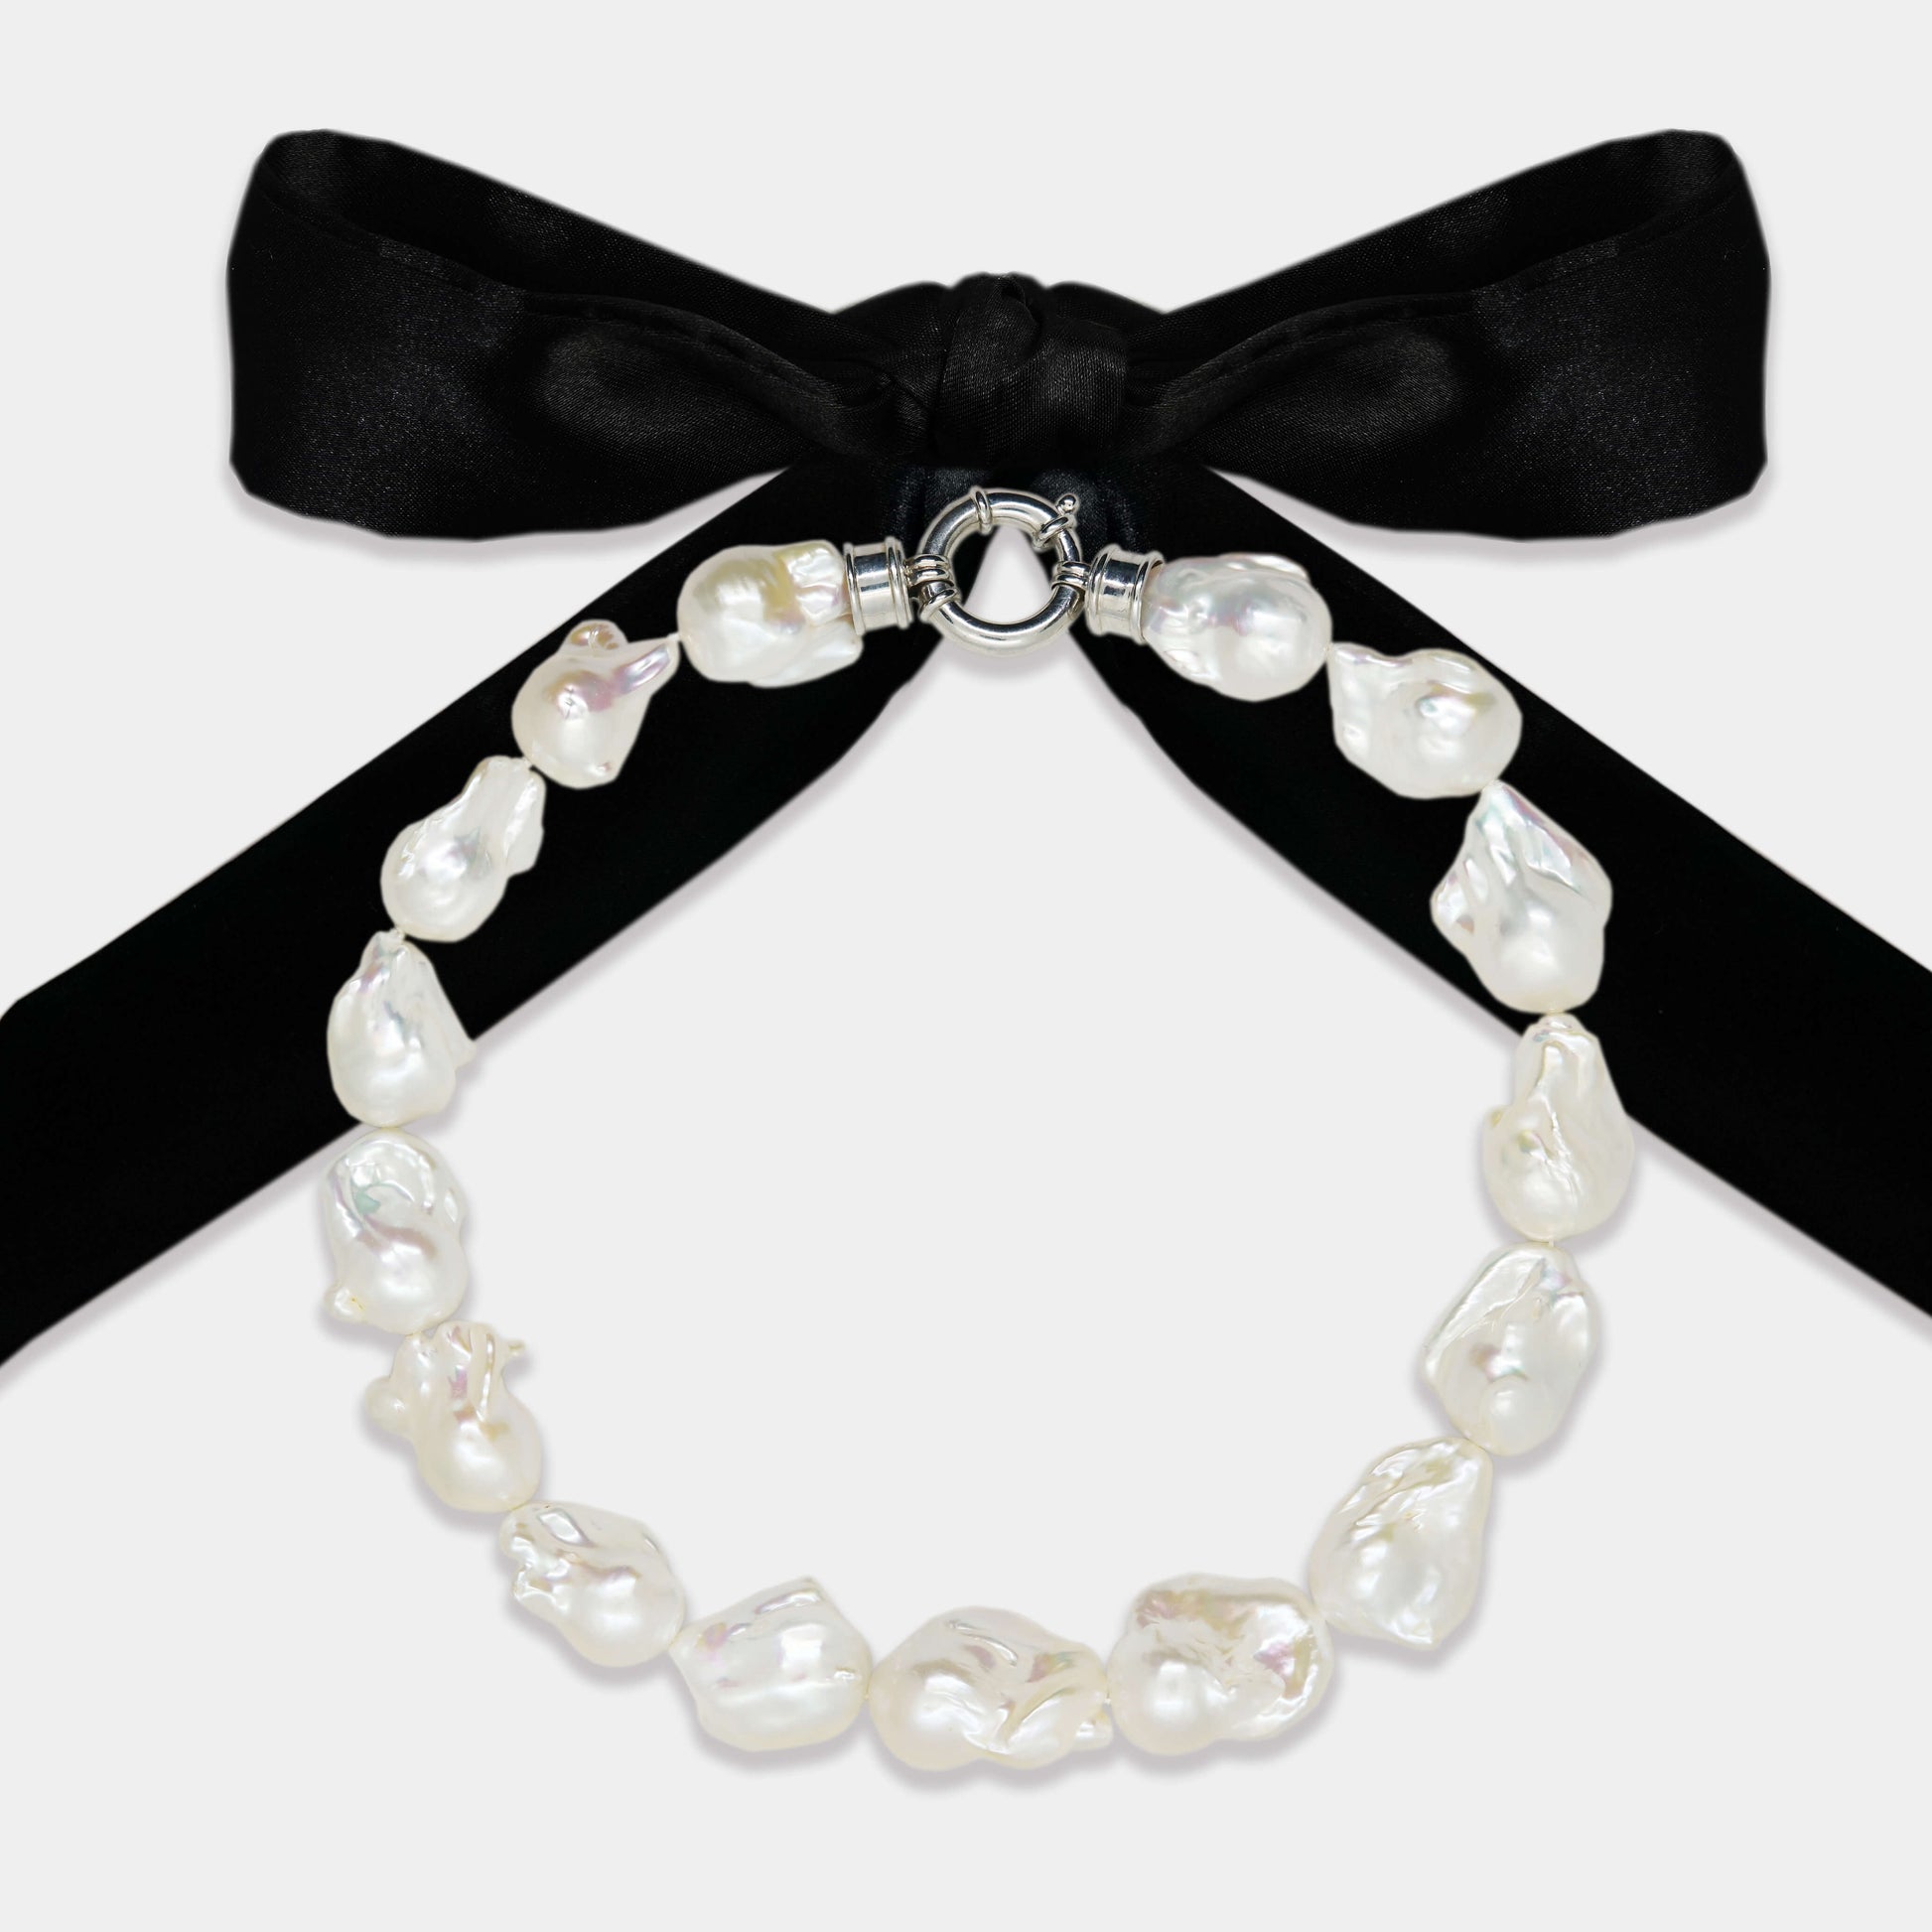 Elegant necklace adorned with pearls and a delicate bow, perfect for adding a touch of sophistication to any outfit.